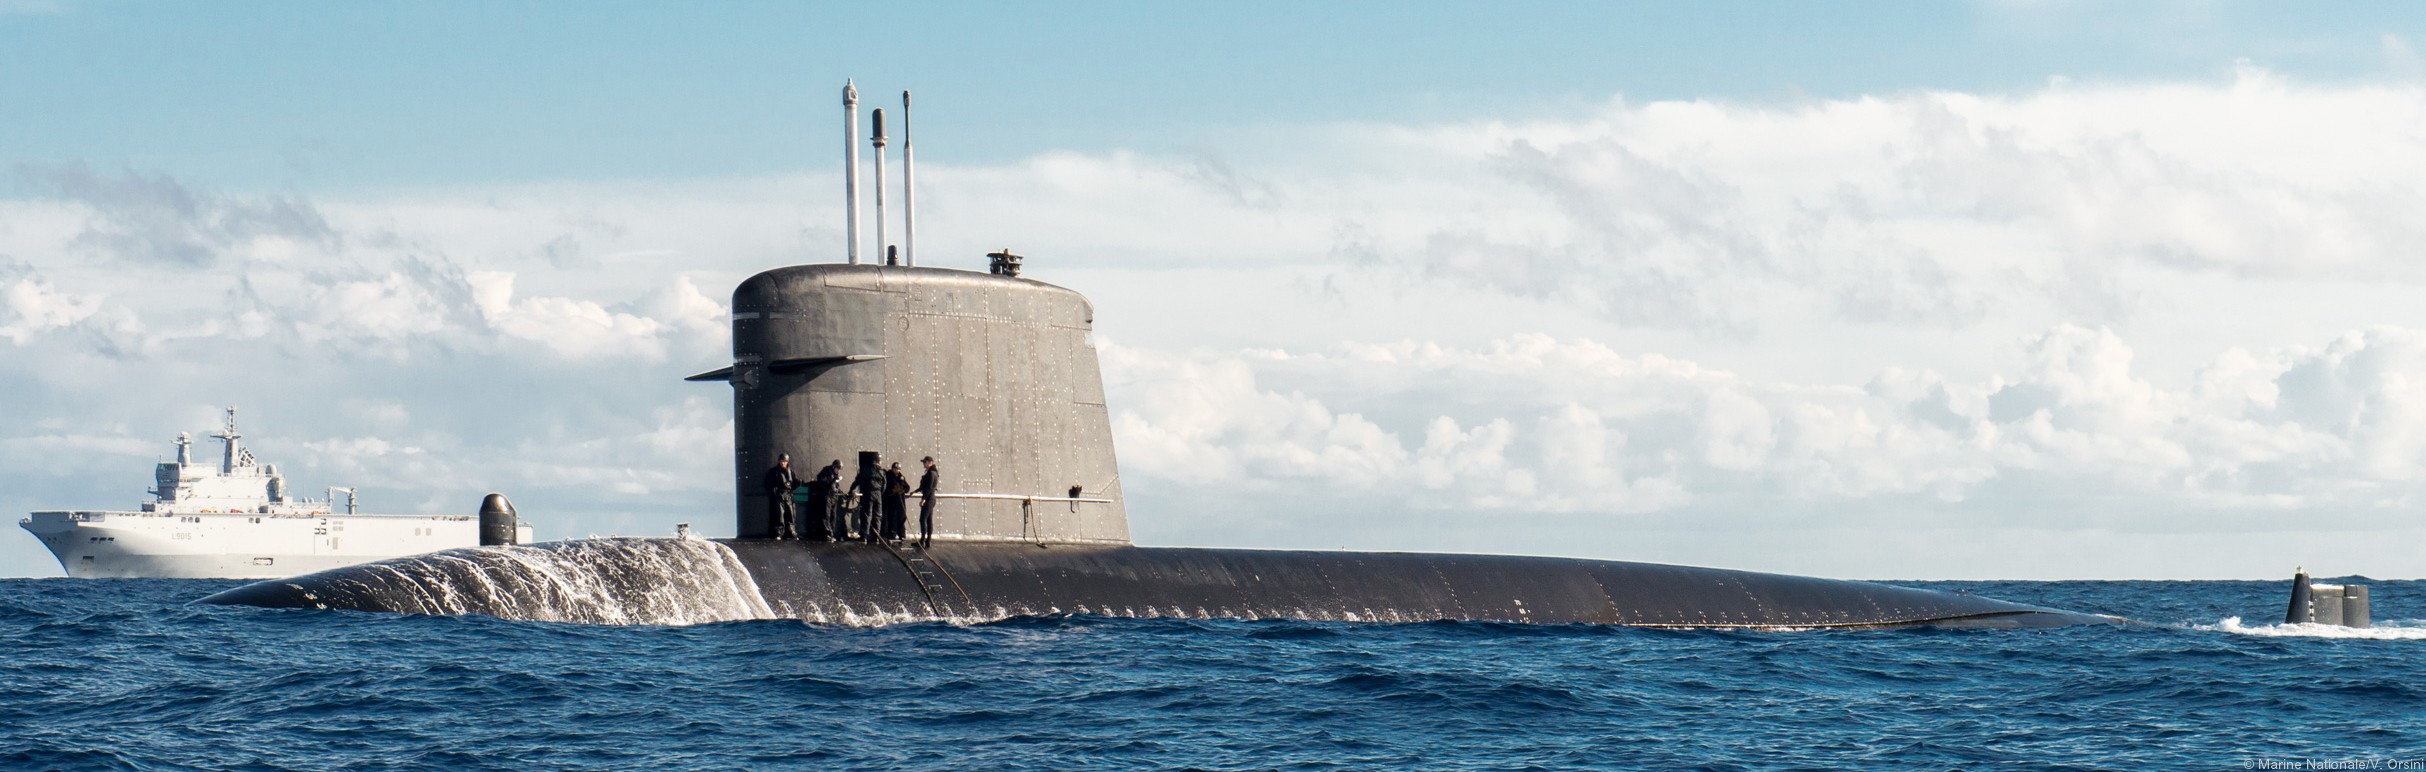 s-603 casabianca rubis class attack submarine ssn french navy marine nationale sna 03